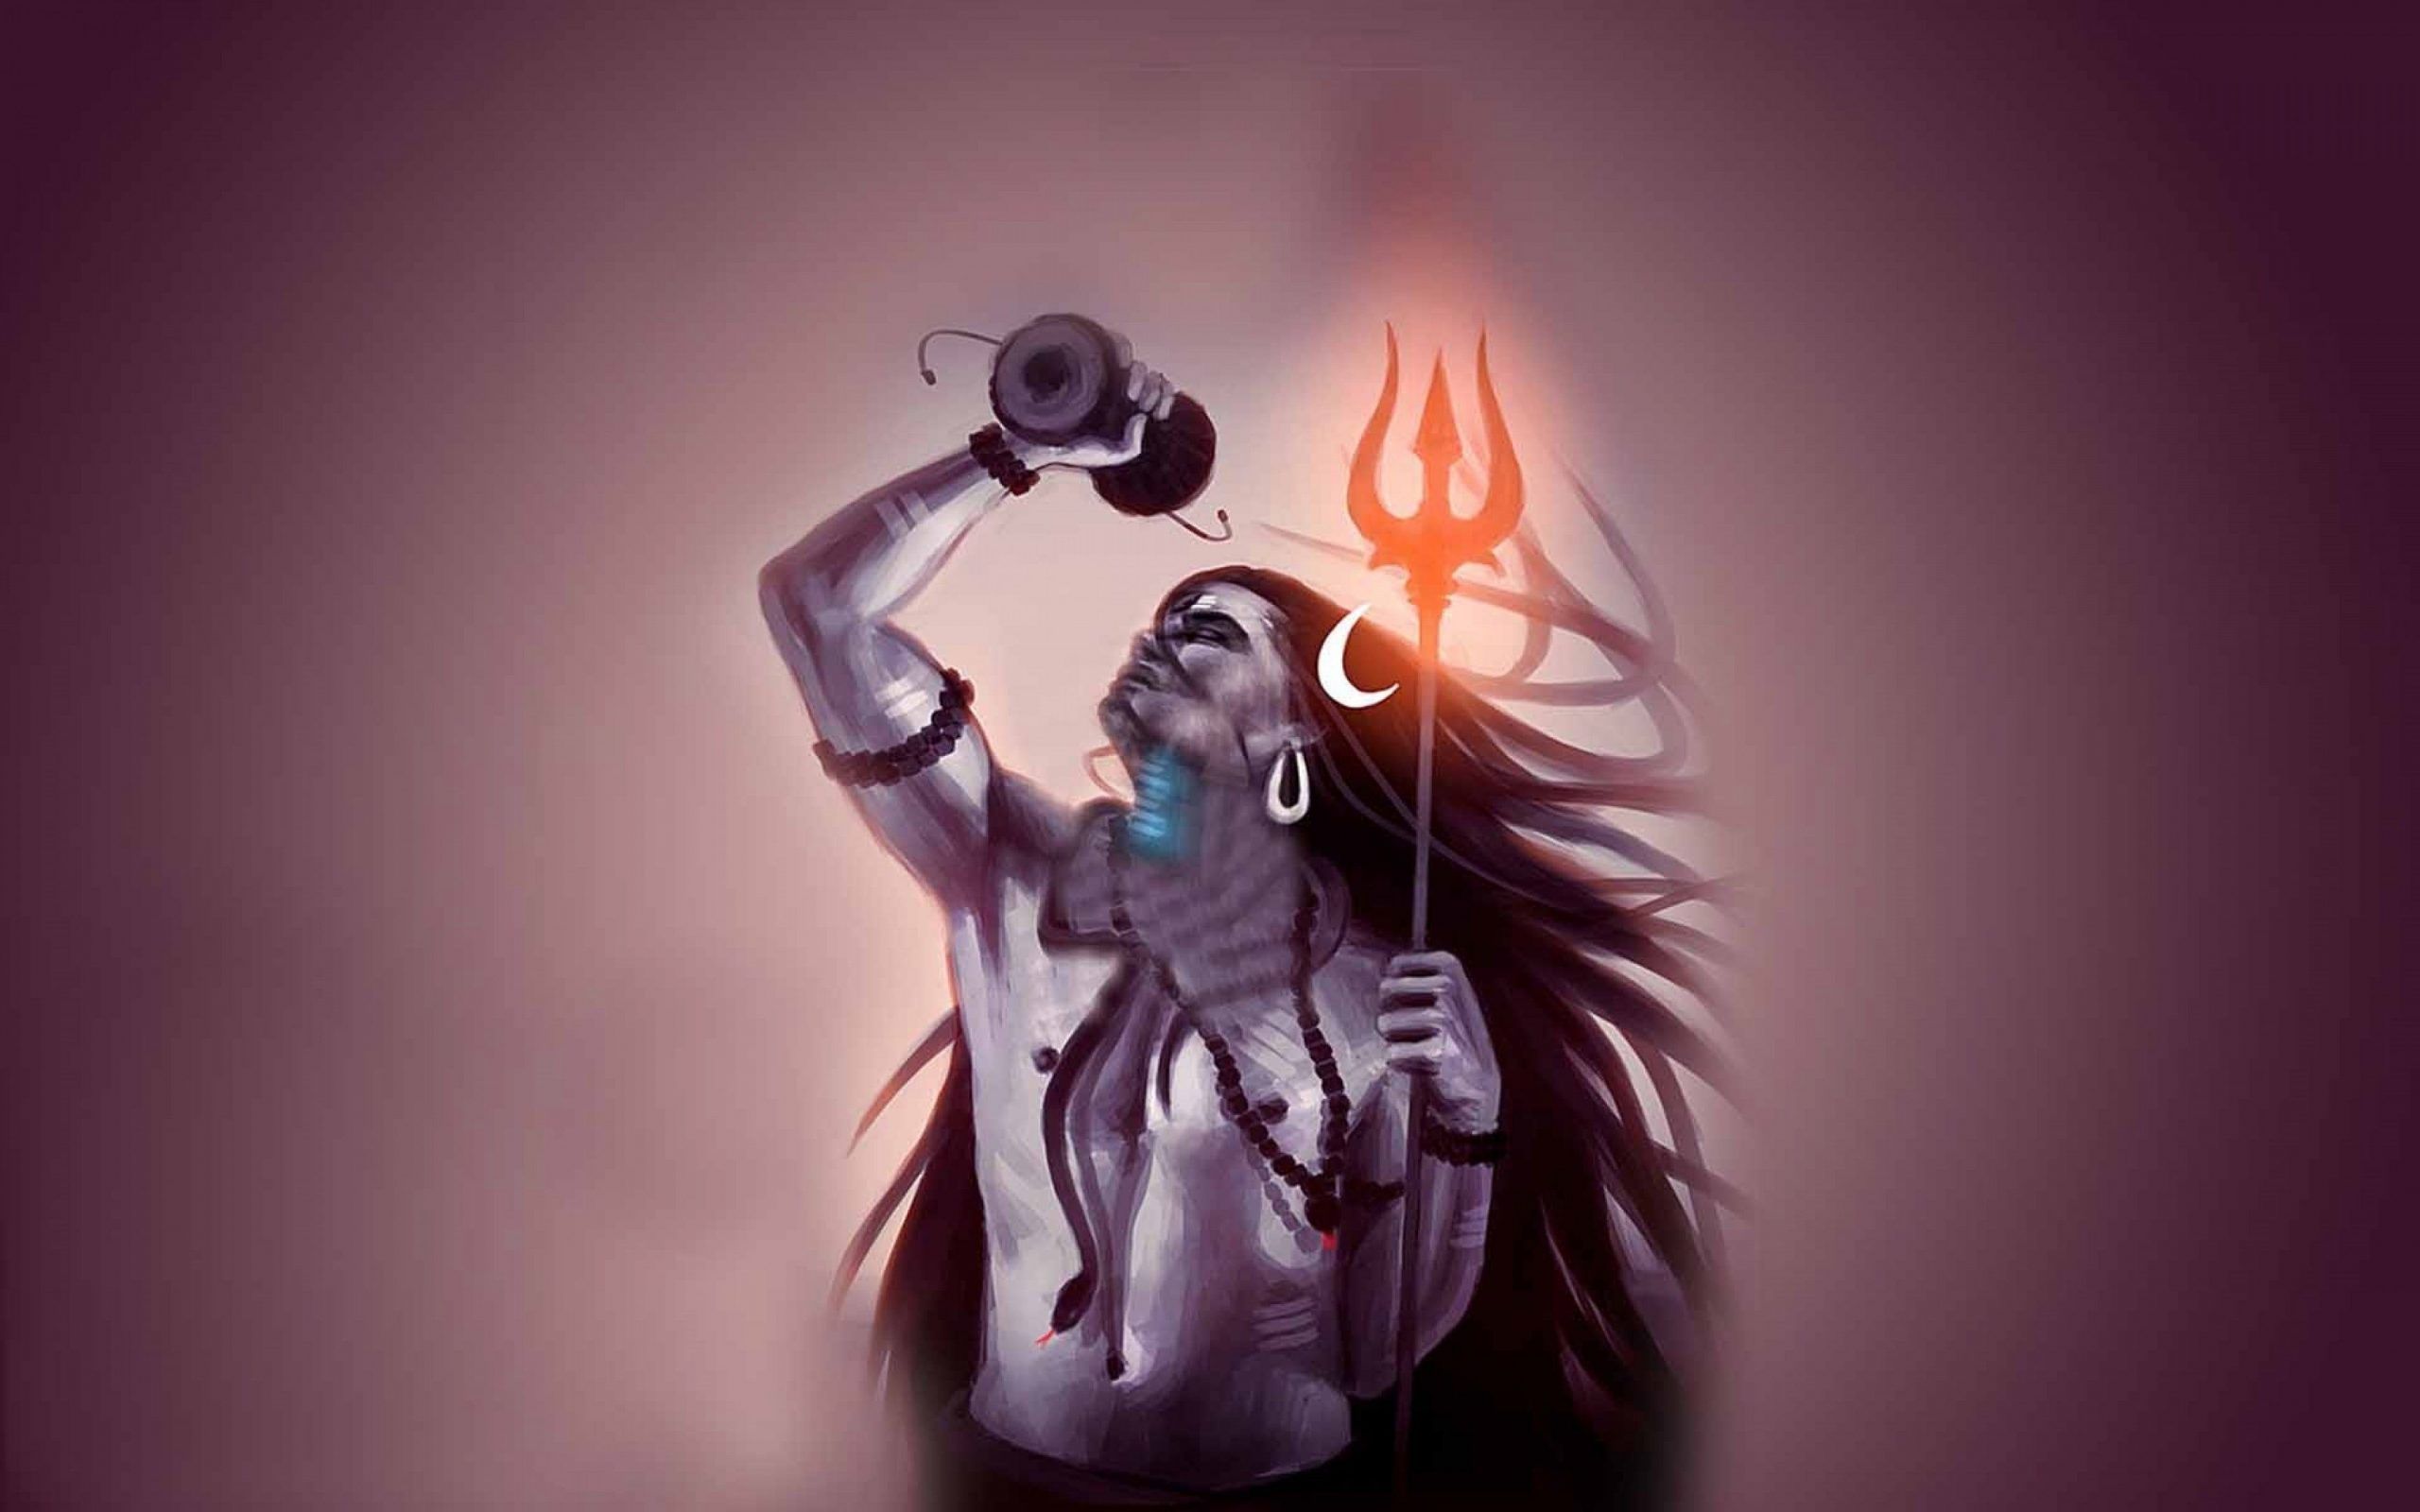 The Mighty God Lord Shiva 4K Image Download For PC